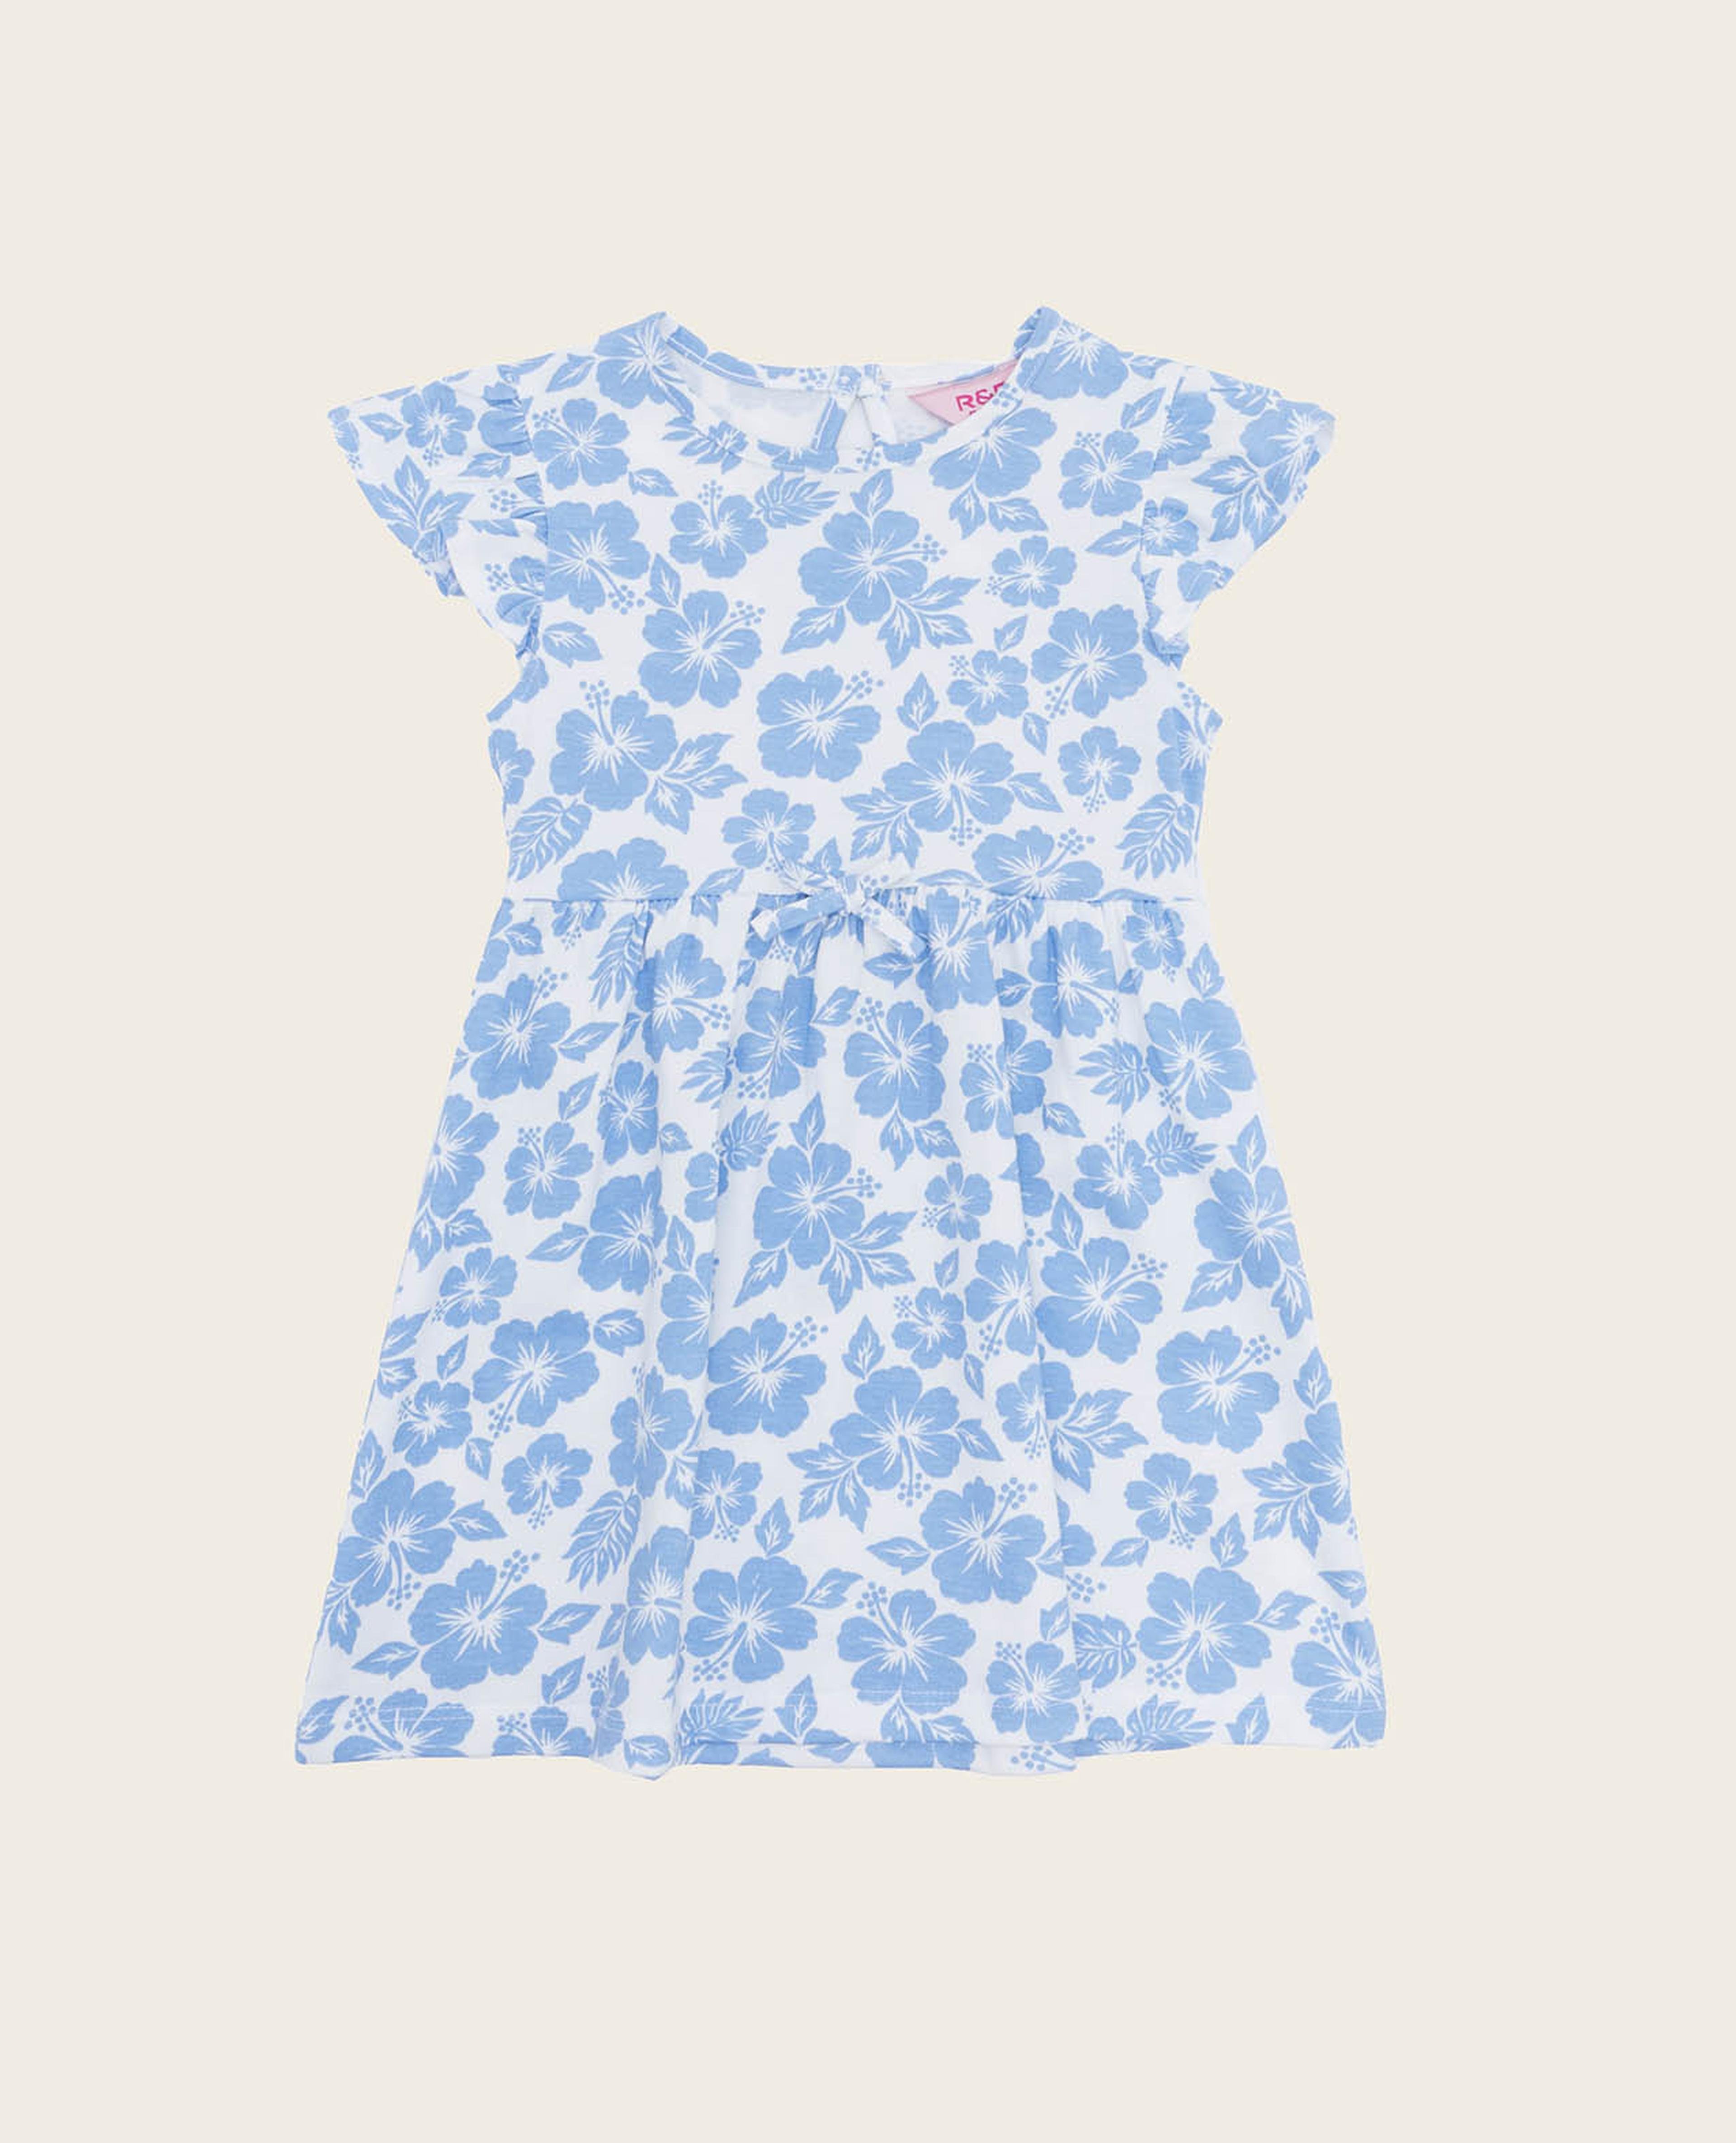 Floral Print Fit and Flare Dress with Crew Neck and Short Sleeves